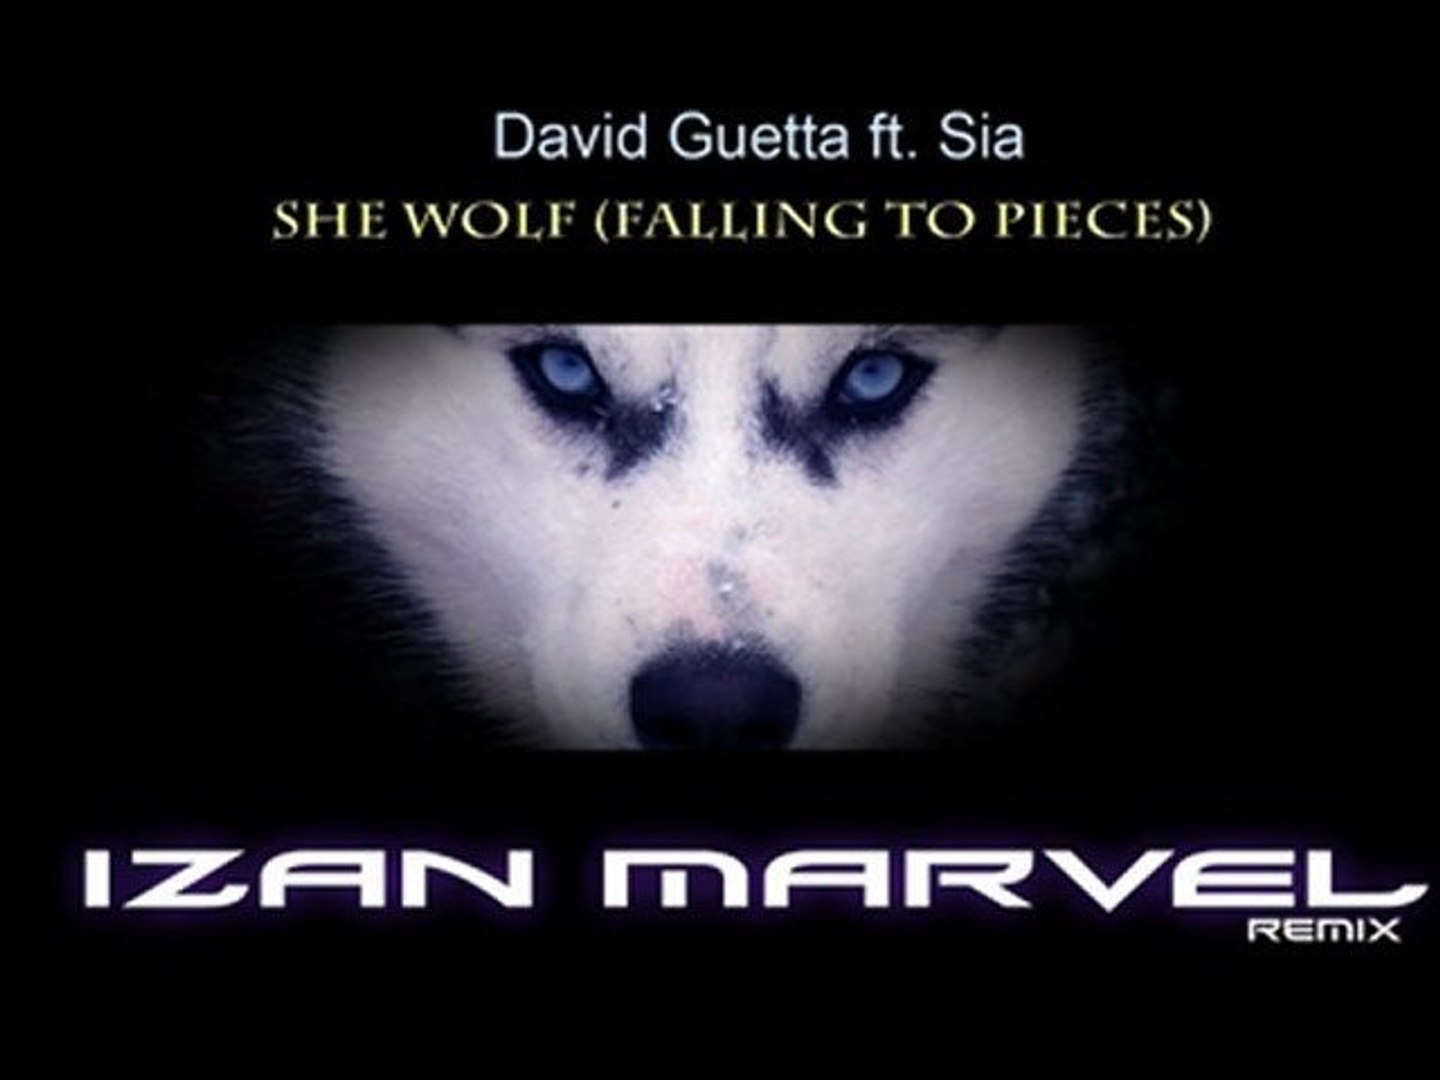 She wolf (Falling to pieces) Izan Marvel Remix - [David Guetta ft. Sia] -  Vídeo Dailymotion